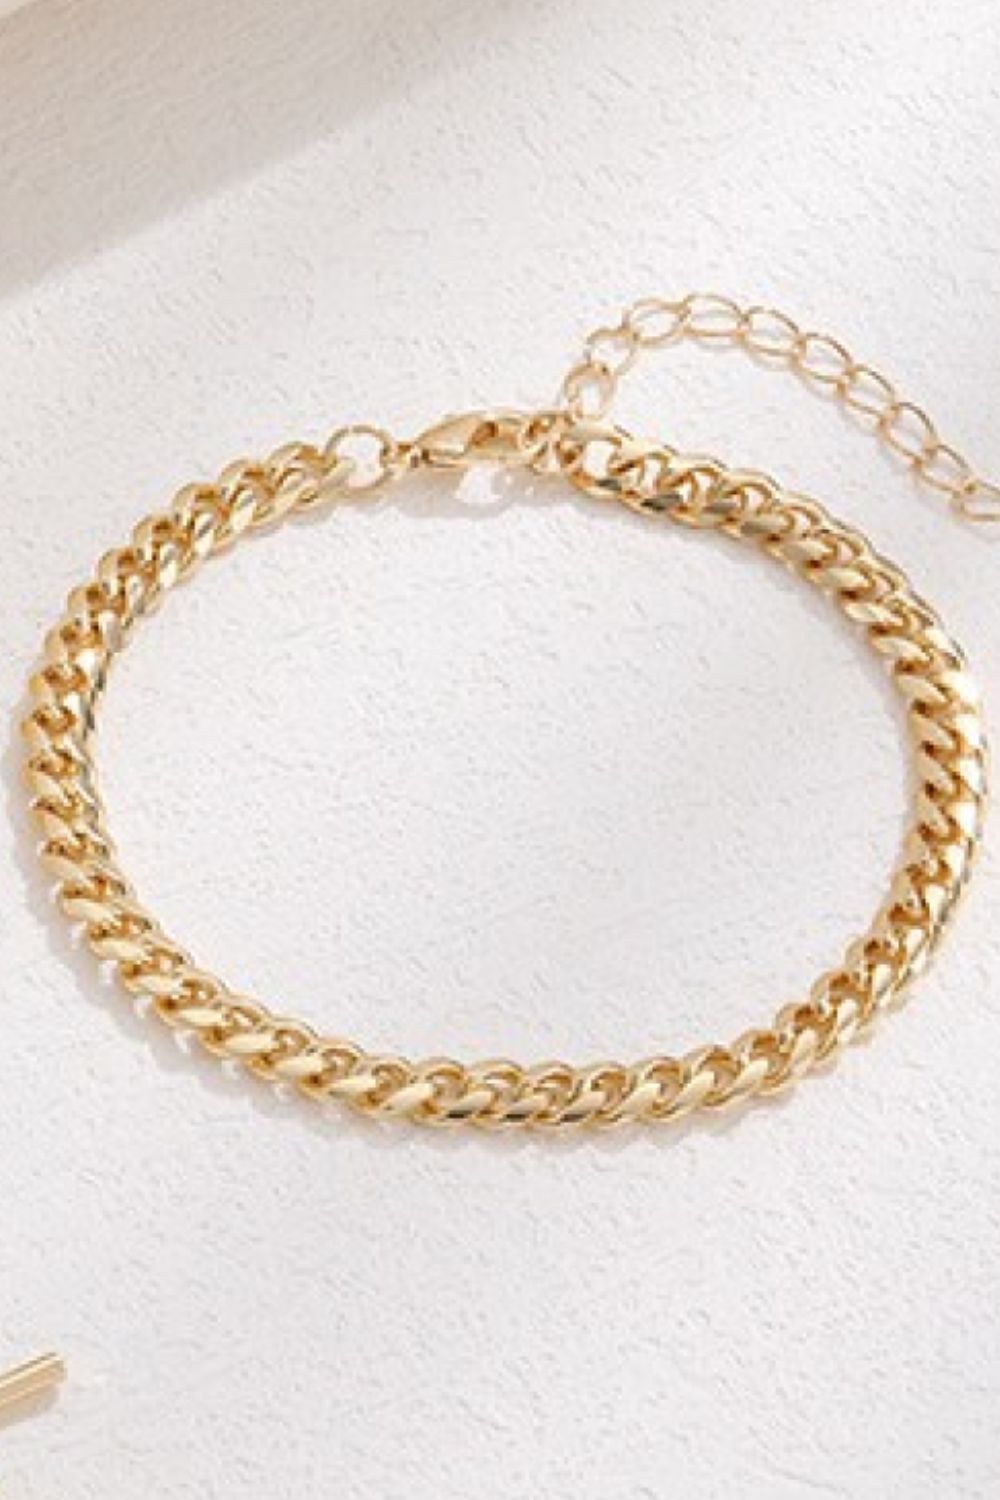 Curb Chain Copper Bracelet - Tophatter Deals and Online Shopping - Electronics, Jewelry, Beauty, Health, Gadgets, Fashion - Tophatter's Discounts & Offers - tophatters - tophatters.co